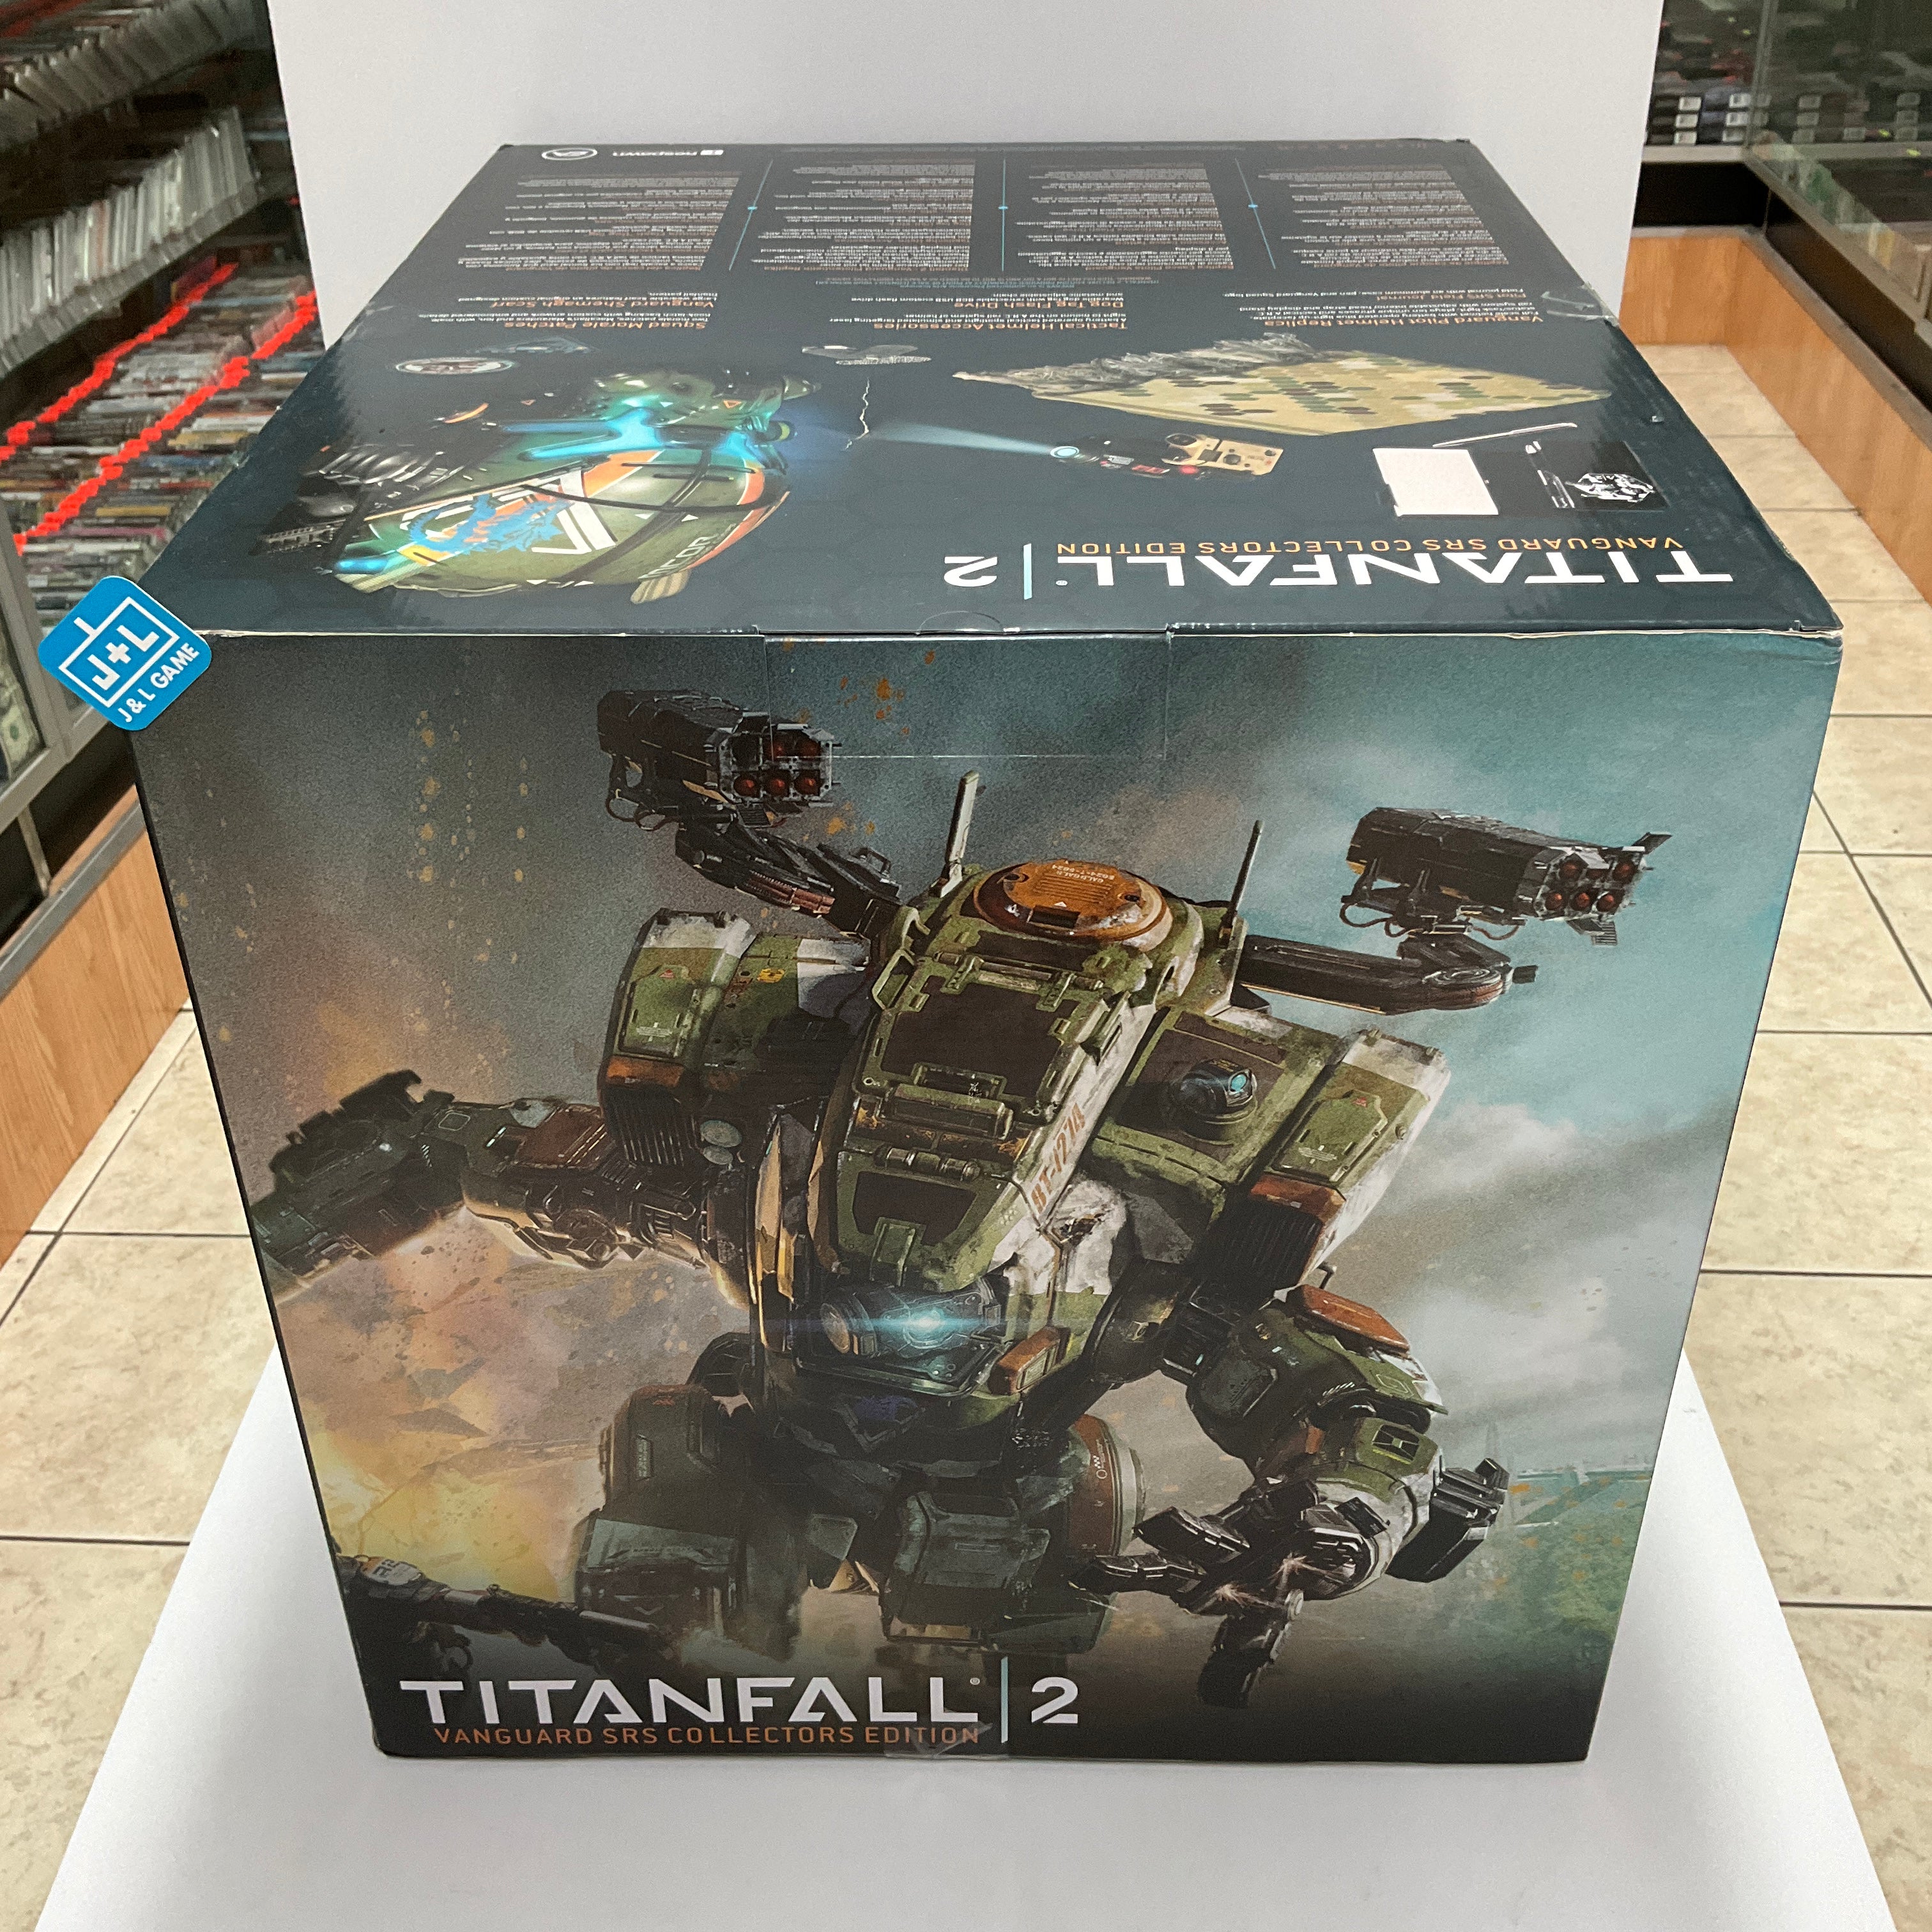 Titanfall 2 - Vanguard Collector's Edition - (PS4) PlayStation 4 Video Games Hasbro   